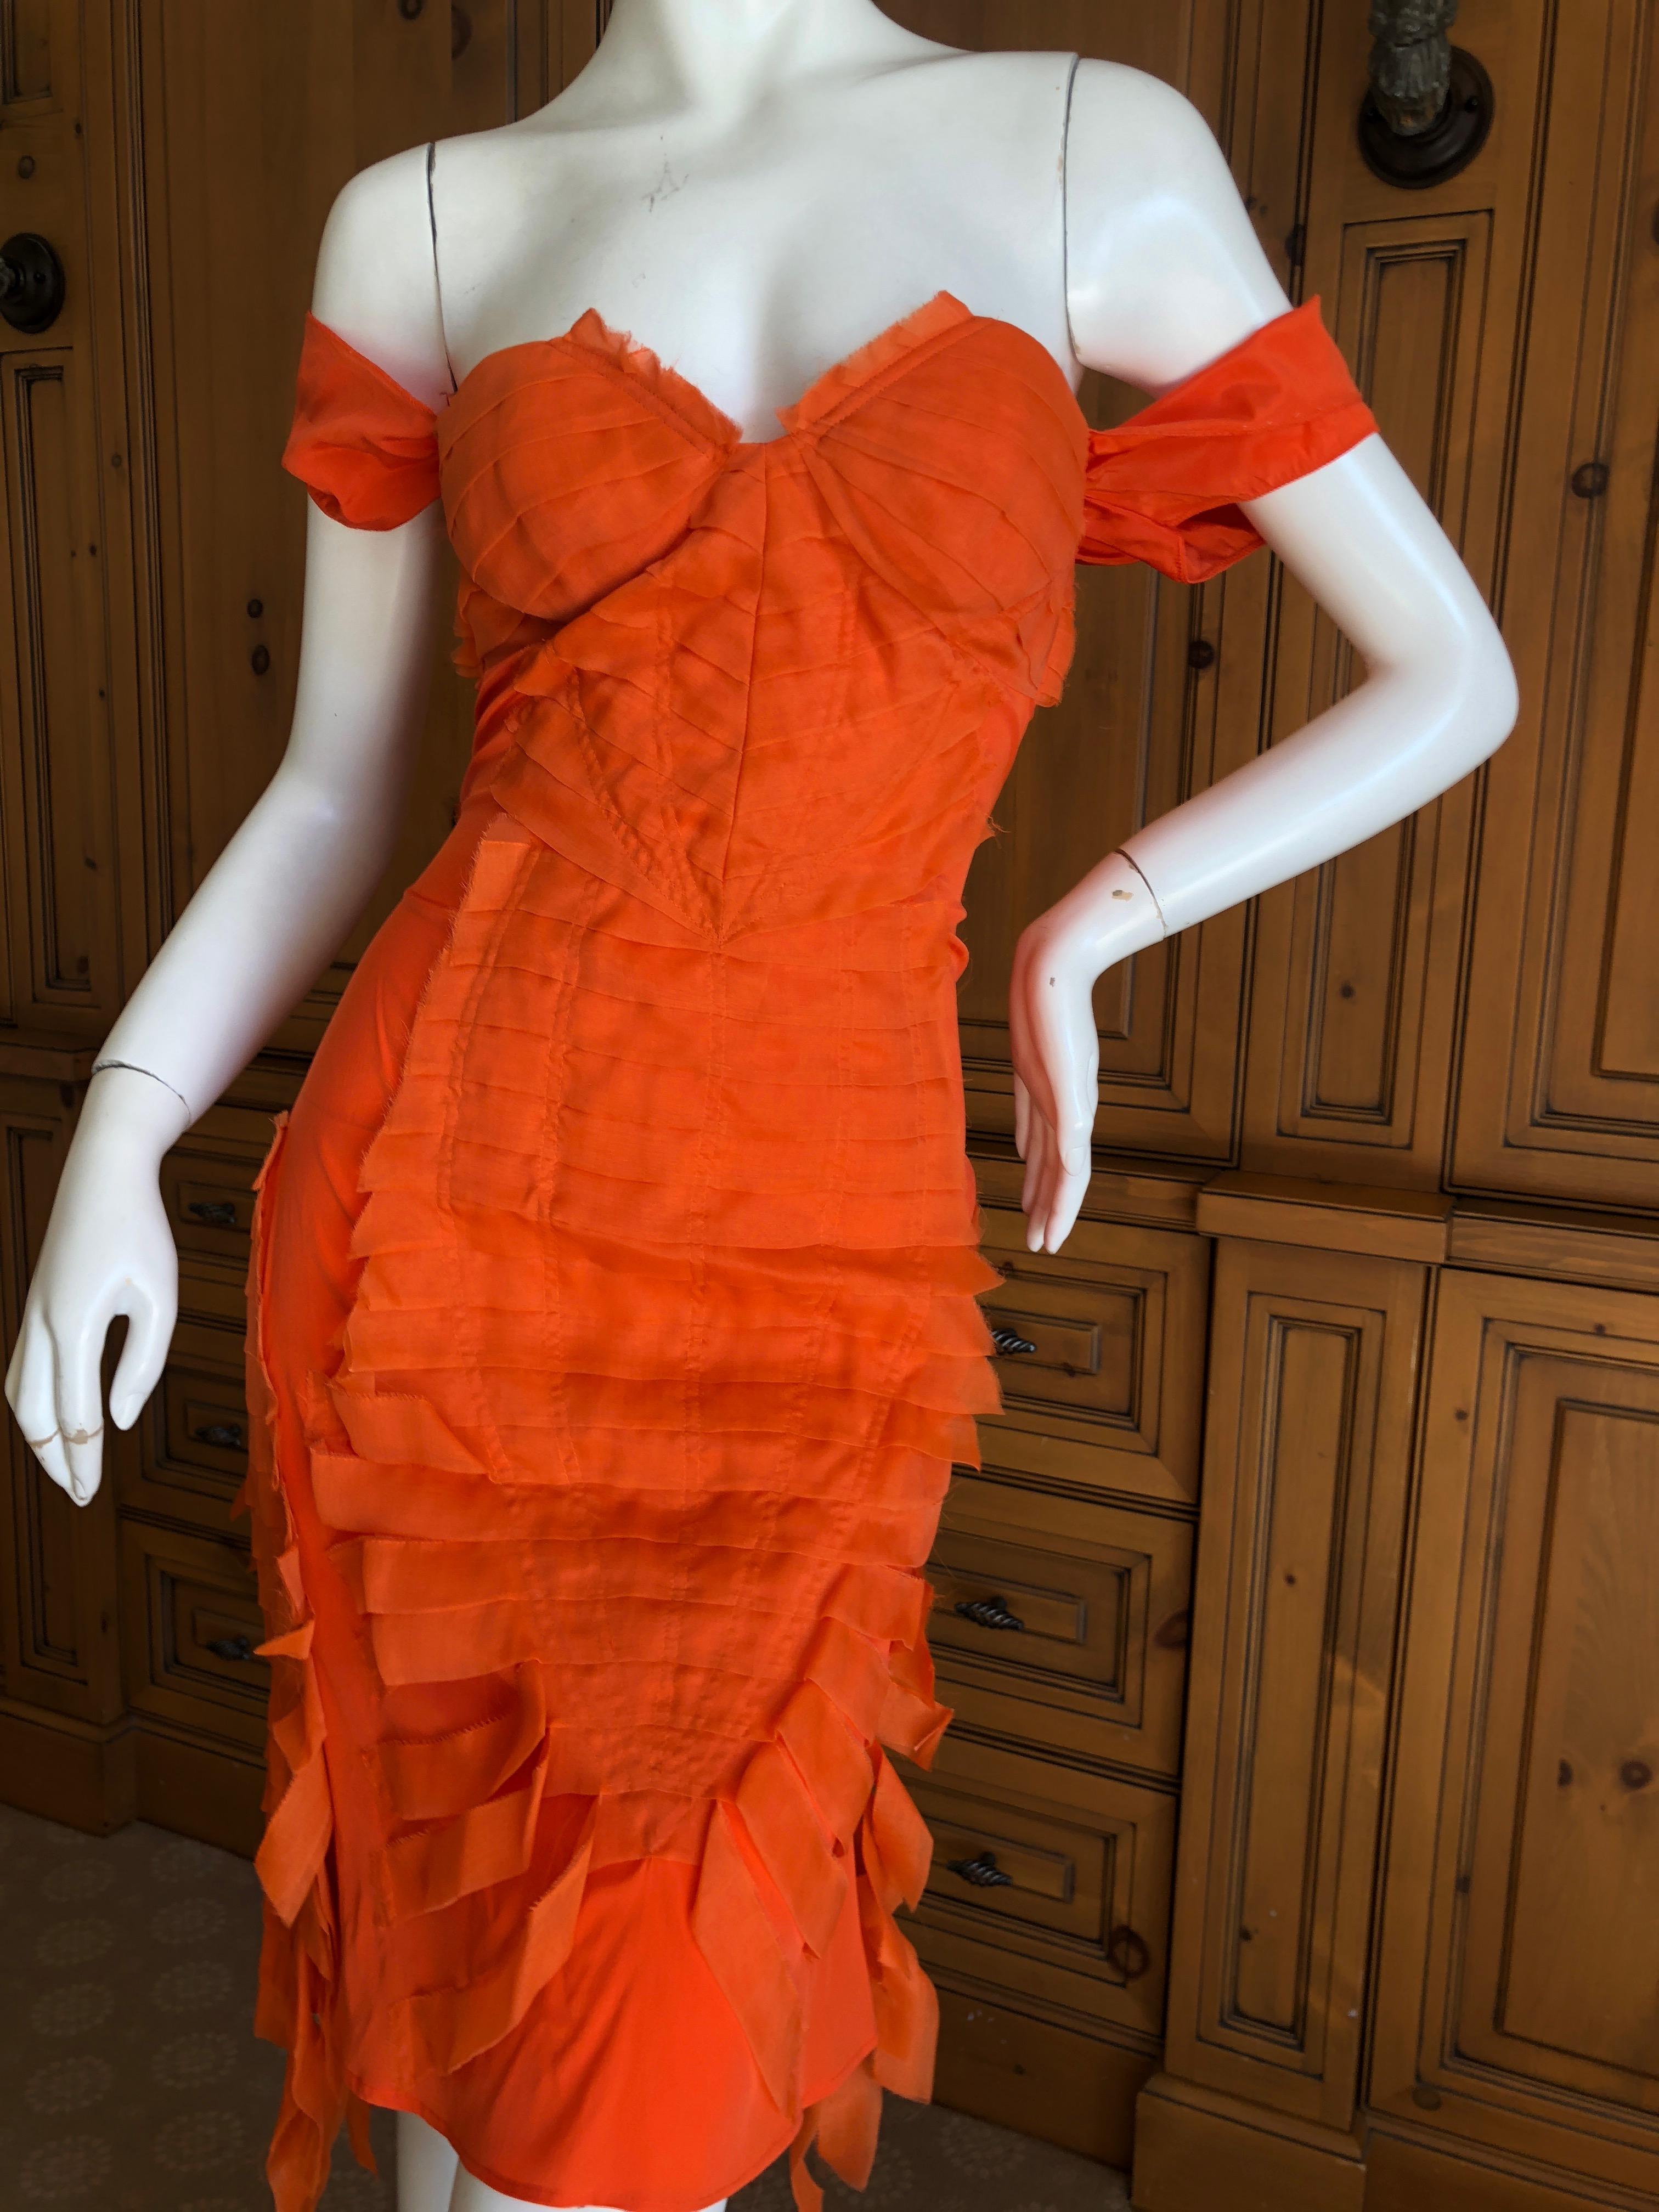 Gucci by Tom Ford 2004 Orange Ribbon Dress Tom Ford Book Piece New Tags For Sale 1